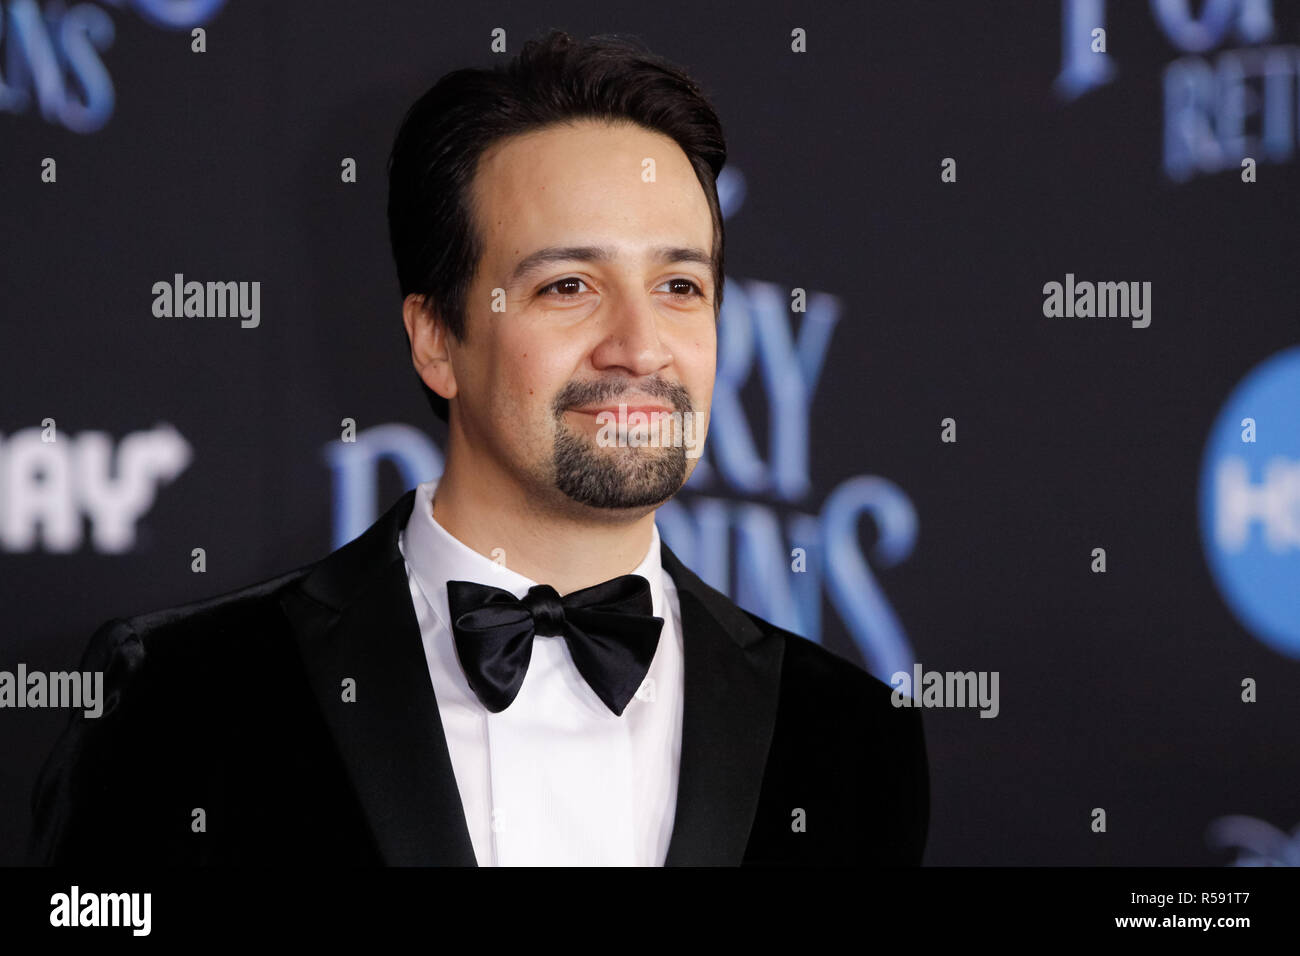 Hollywood, California, USA. 29th November, 2018. Lin-Manuel Miranda at the World Premiere of Disney's 'Mary Poppins Returns' held at the Dolby Theatre in Hollywood, CA, November 29, 2018. Photo by Joseph Martinez / PictureLux Credit: PictureLux / The Hollywood Archive/Alamy Live News Stock Photo